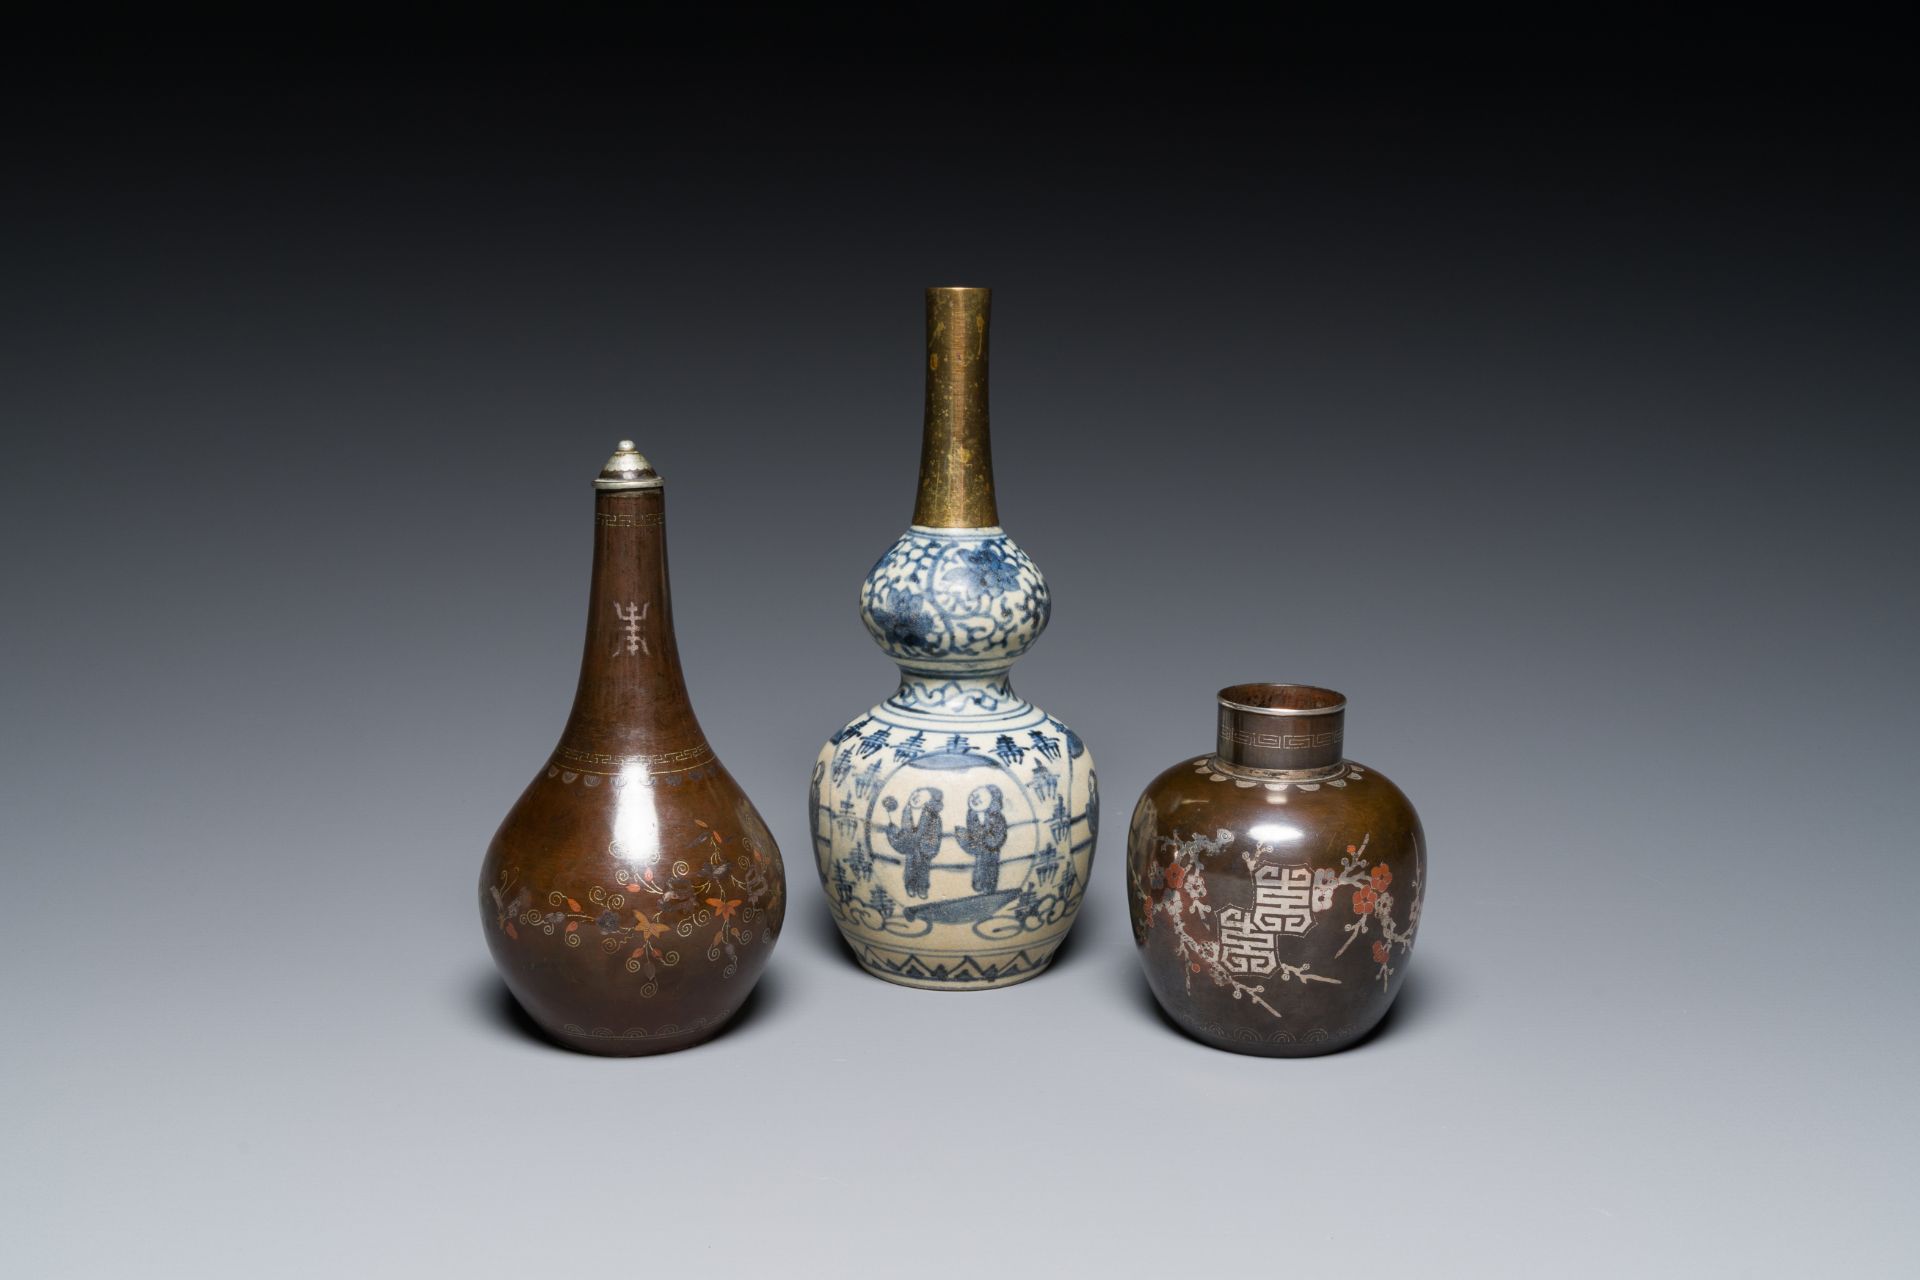 Two Vietnamese copper- and silver-inlaid paktong wares and a Chinese blue and white double gourd vas